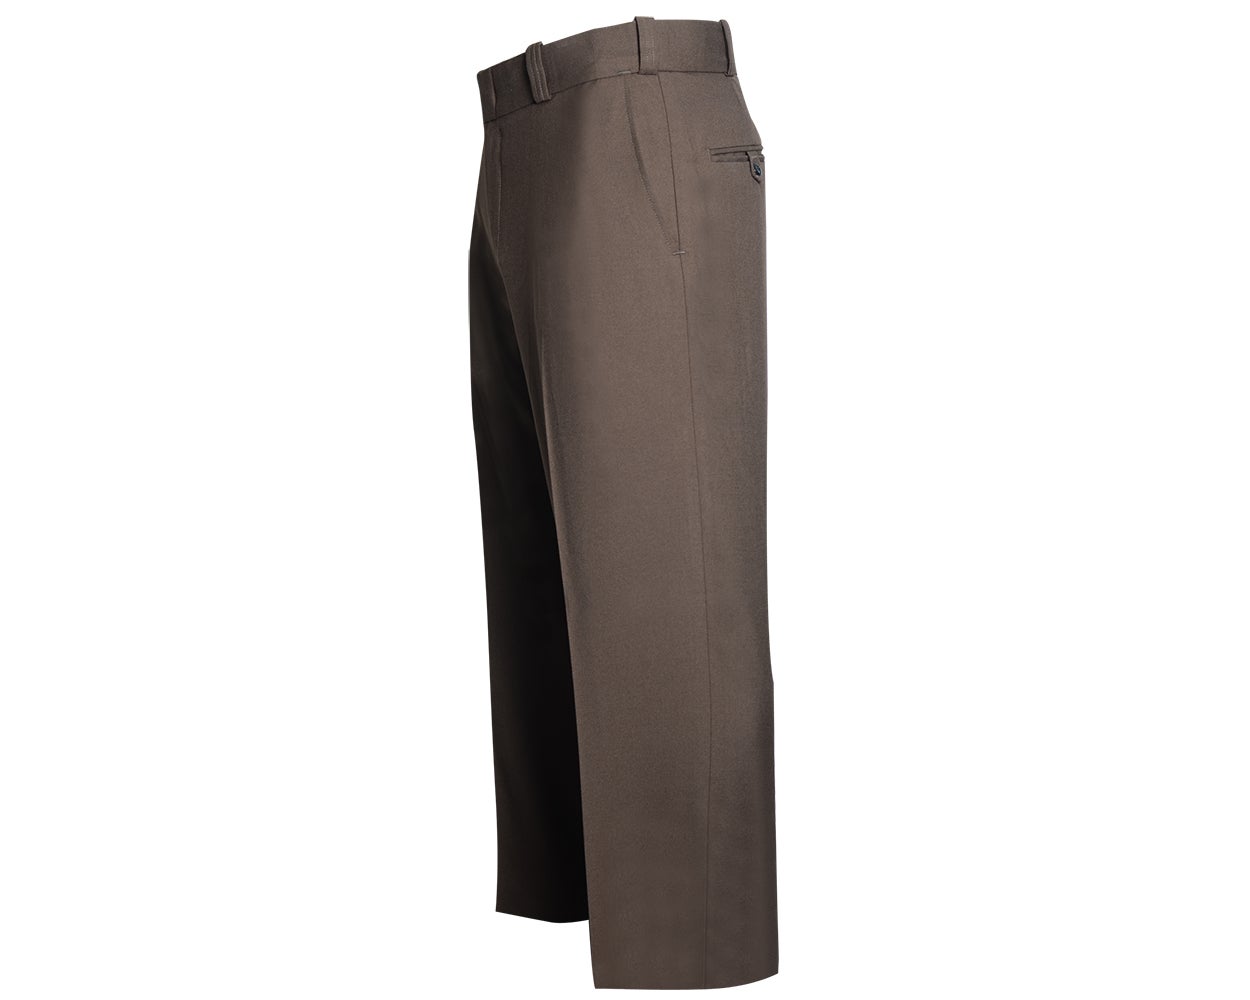 Flying Cross Justice 75% Poly/25% Wool Men's Uniform Pants with Freedom Flex Waistband 47280